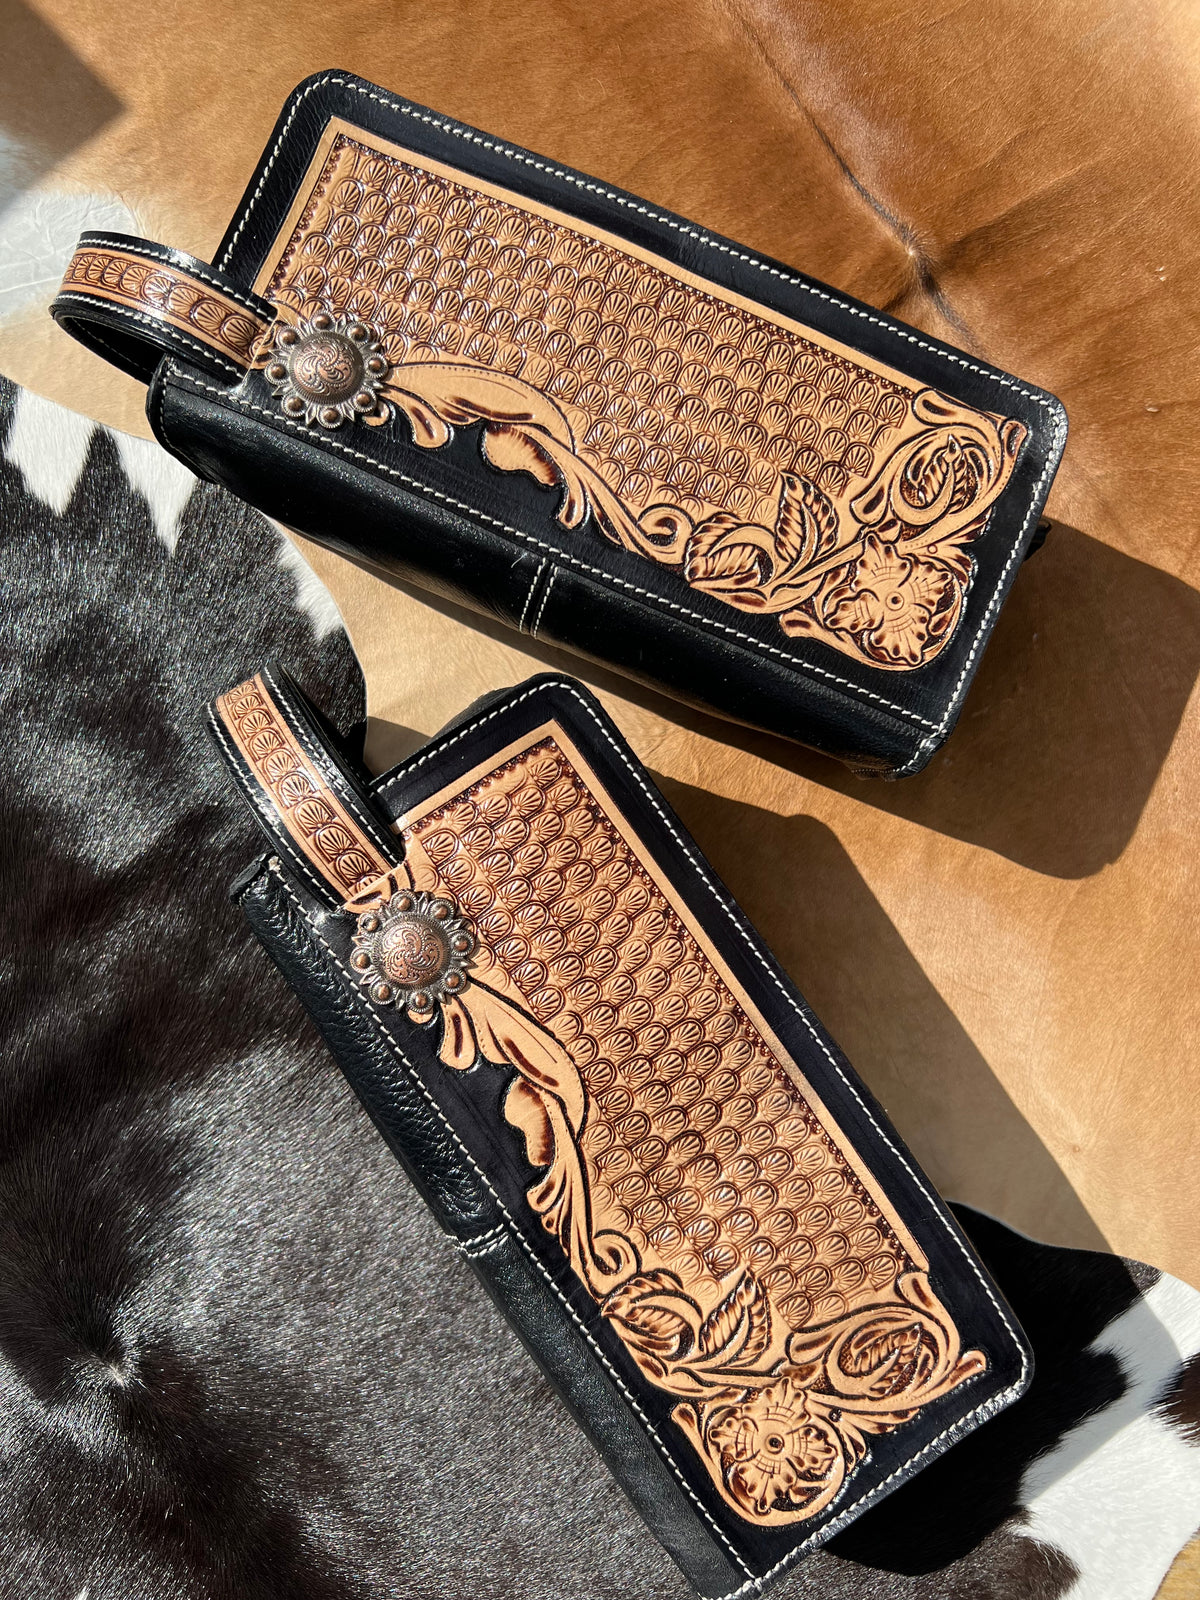 Tooled Leather Toiletry Bag with Concho